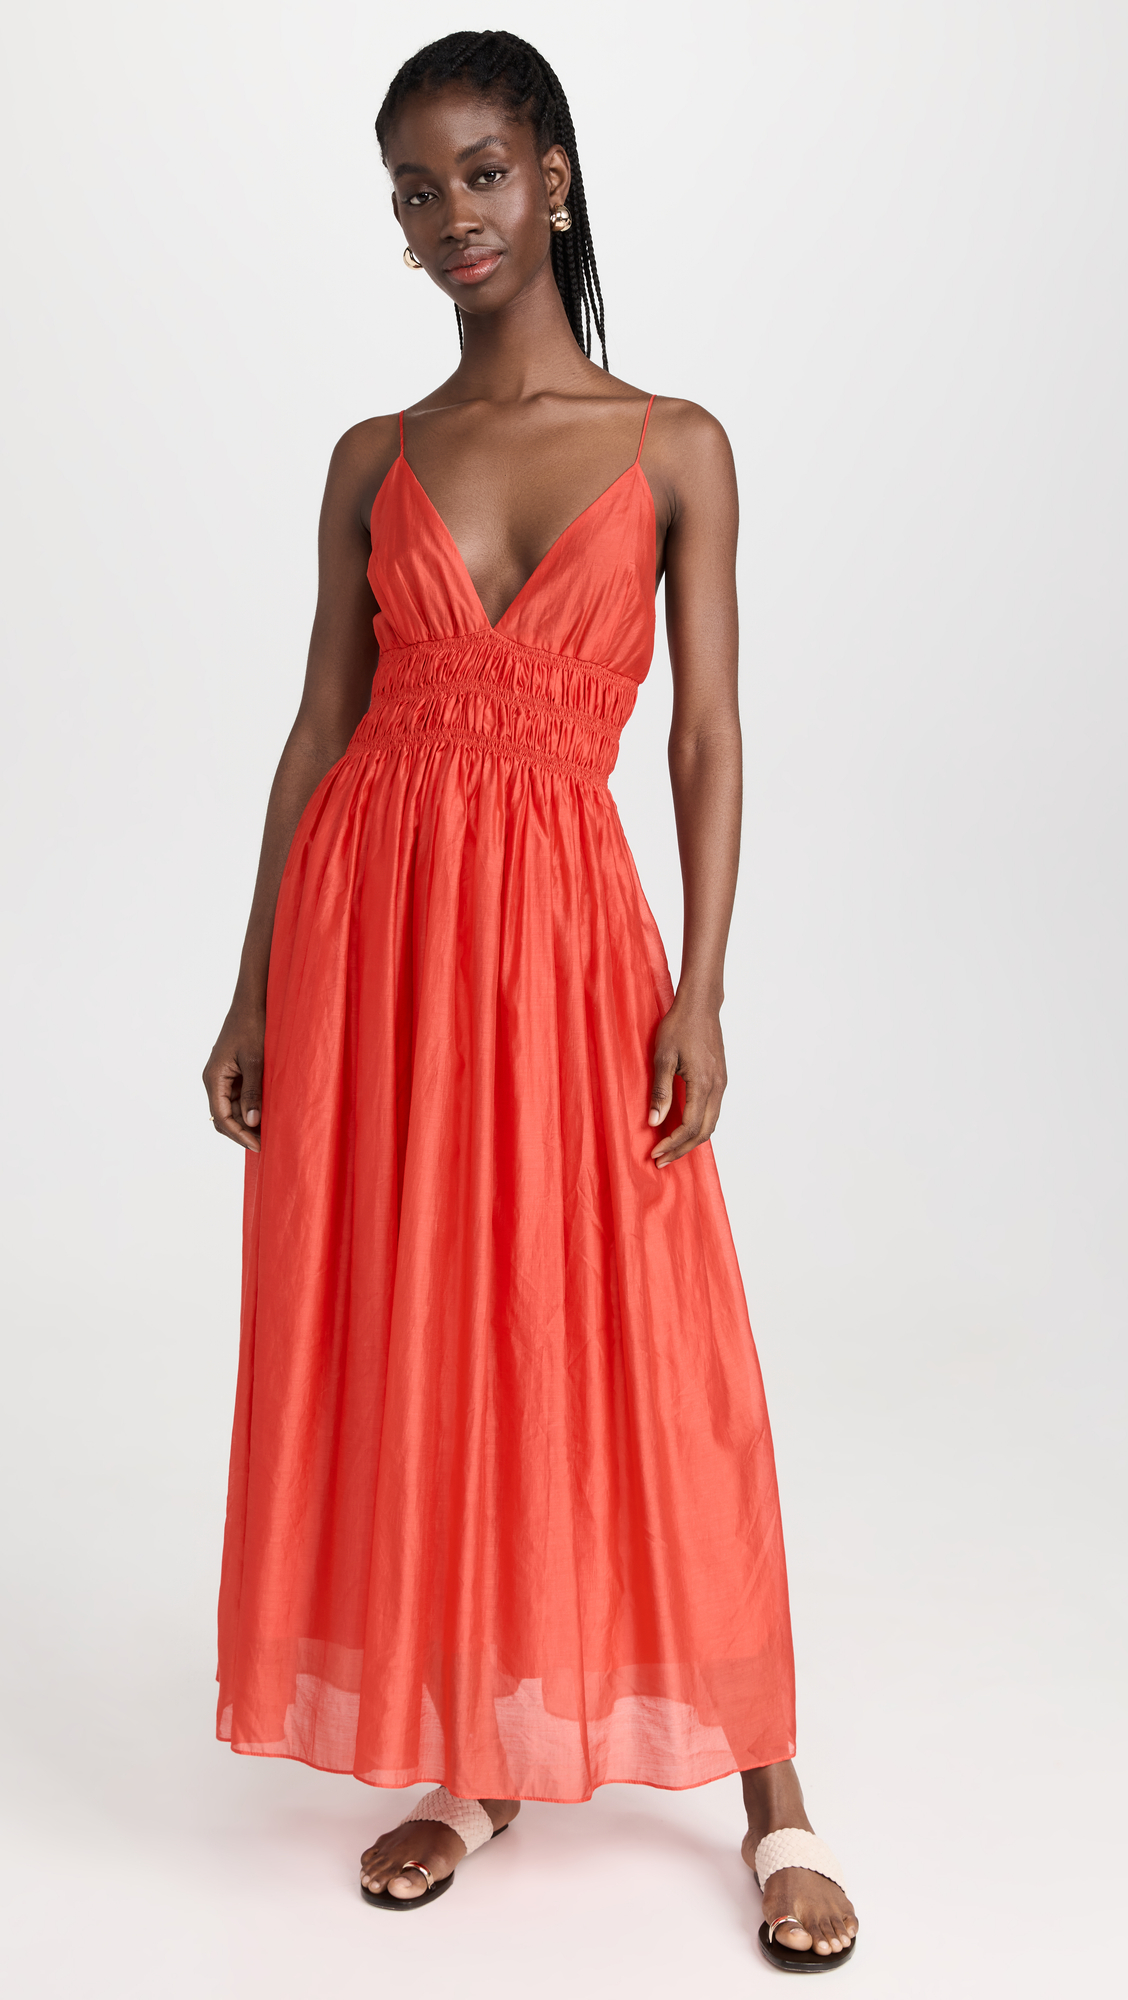 42 Summer Dresses from Shopbop, Revolve, and Nordstrom | Who What Wear